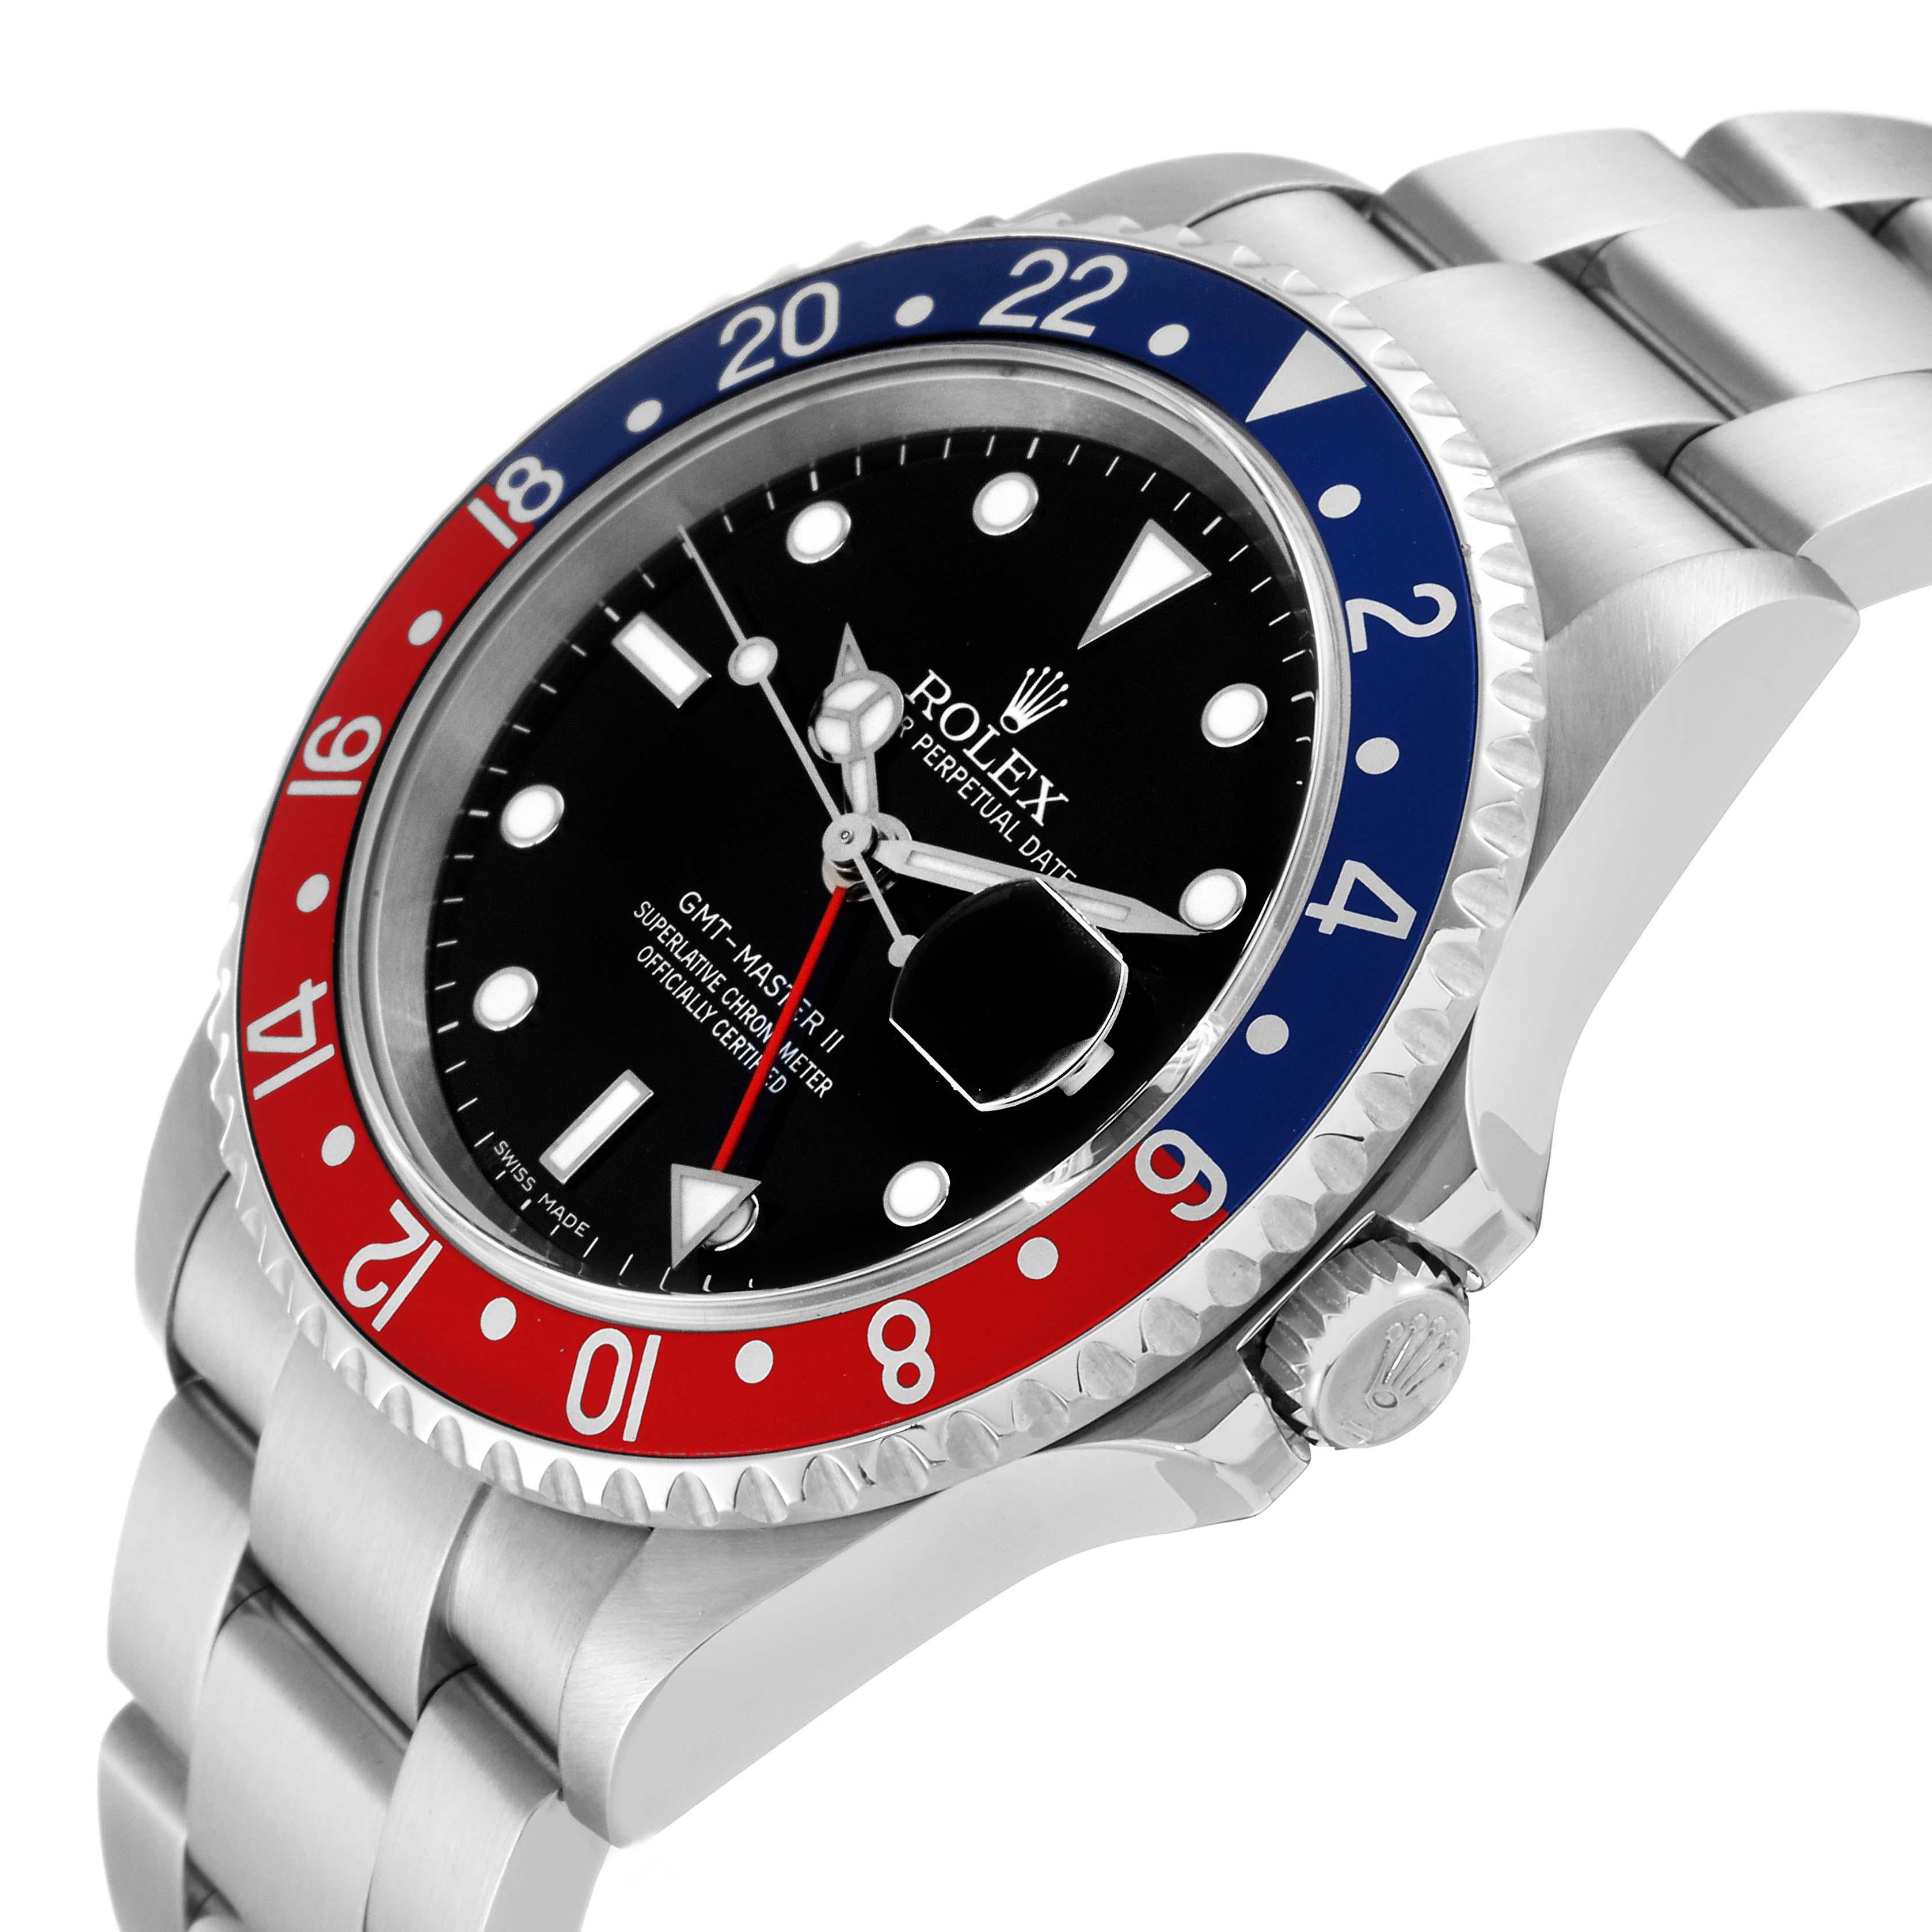 Rolex GMT Master II Blue Red Pepsi Error Dial Mens Watch 16710 Box Papers 1